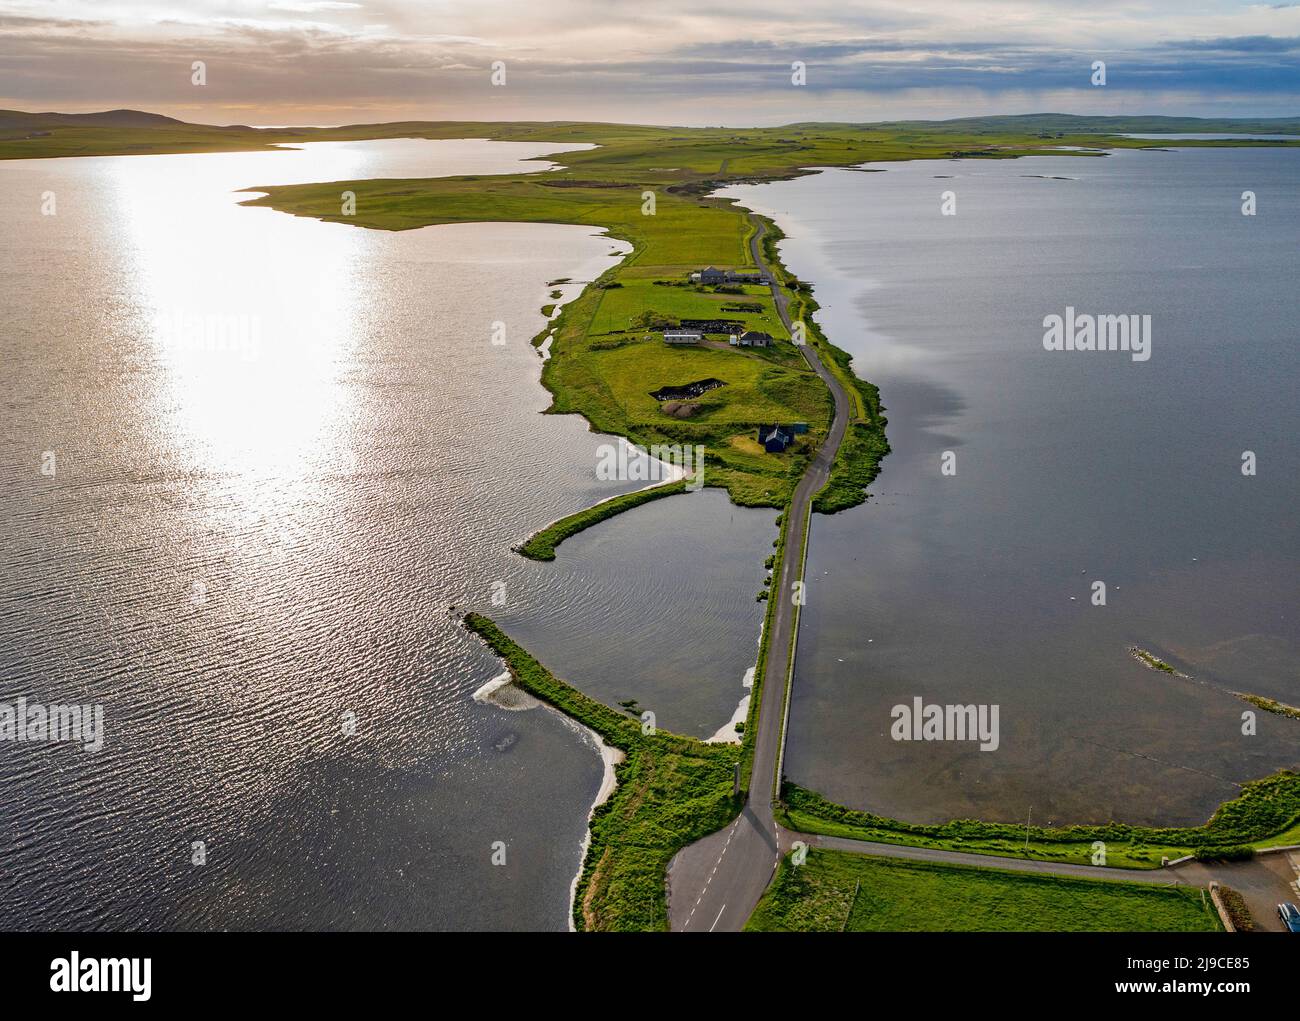 Aerial view of the Ness of Brodgar archaeological site located between  Loch Stenness (left) and Loch Harray, West Mainland, Orkney Islands, Scotland. Stock Photo